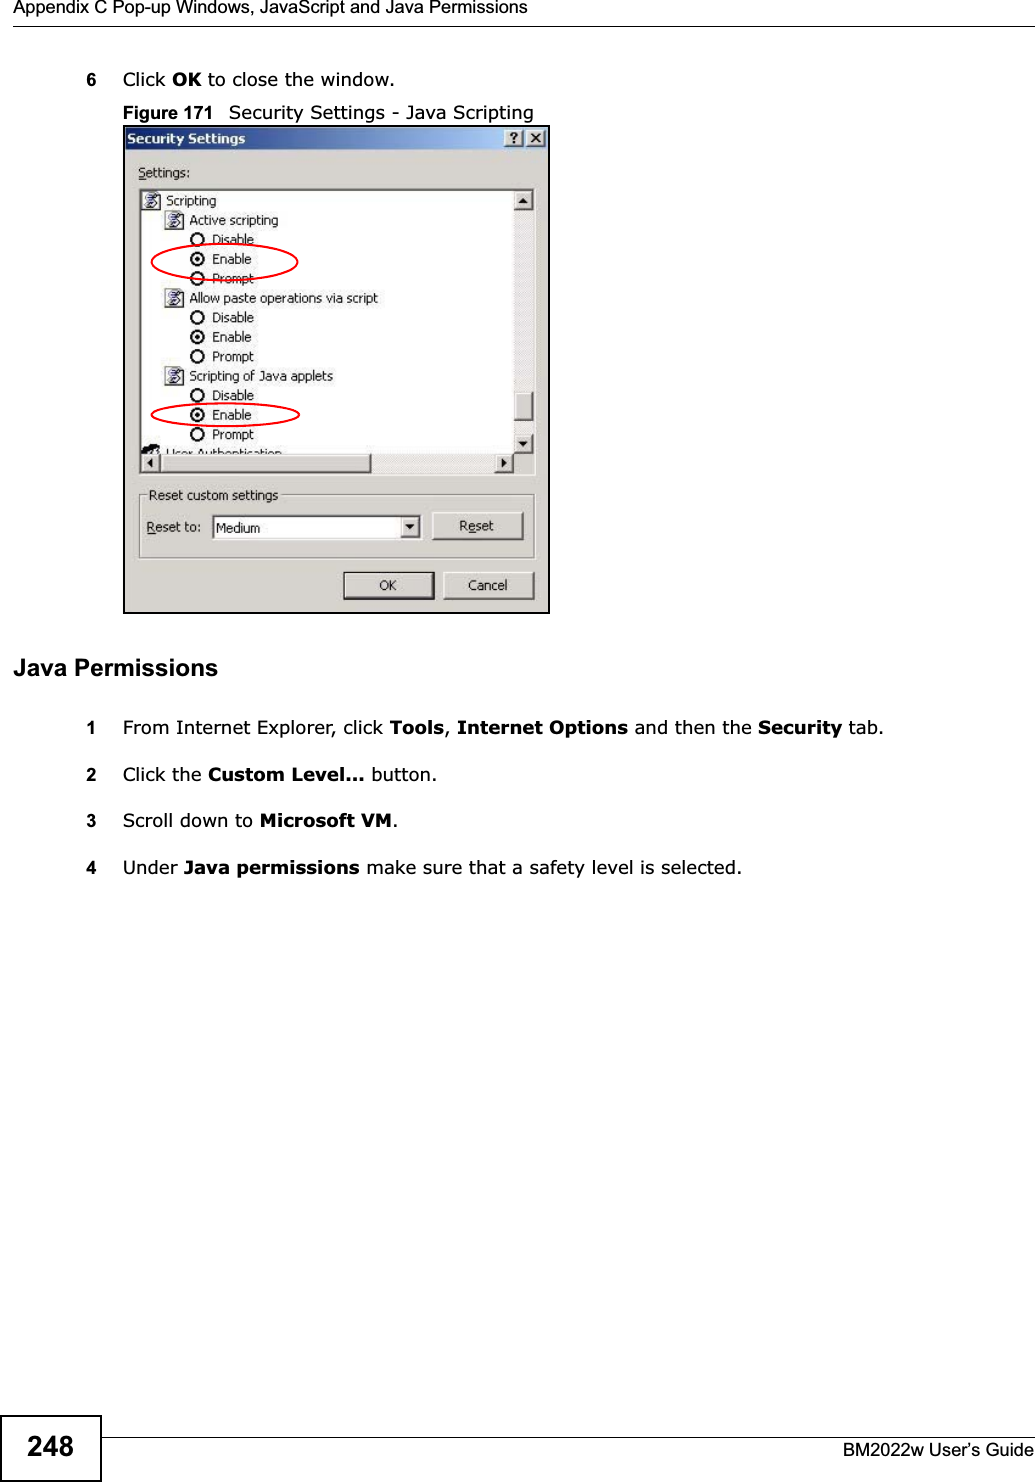 Appendix C Pop-up Windows, JavaScript and Java PermissionsBM2022w User’s Guide2486Click OK to close the window.Figure 171   Security Settings - Java ScriptingJava Permissions1From Internet Explorer, click Tools,Internet Options and then the Security tab. 2Click the Custom Level... button. 3Scroll down to Microsoft VM.4Under Java permissions make sure that a safety level is selected.